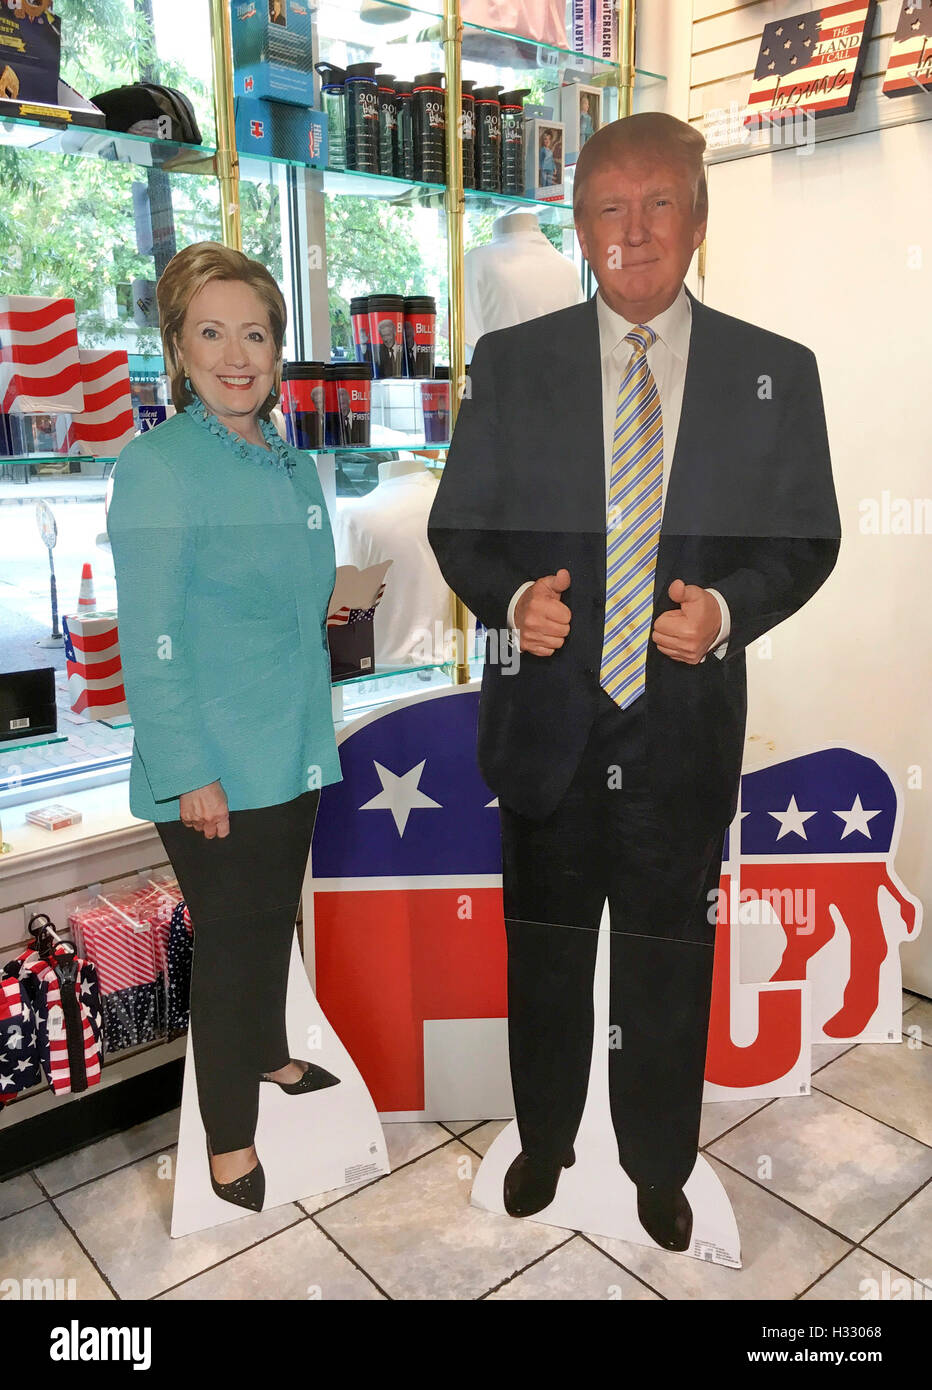 Effigies of Hillary Clinton and Donald Trump on different items during the american presidential campaign, USA Stock Photo